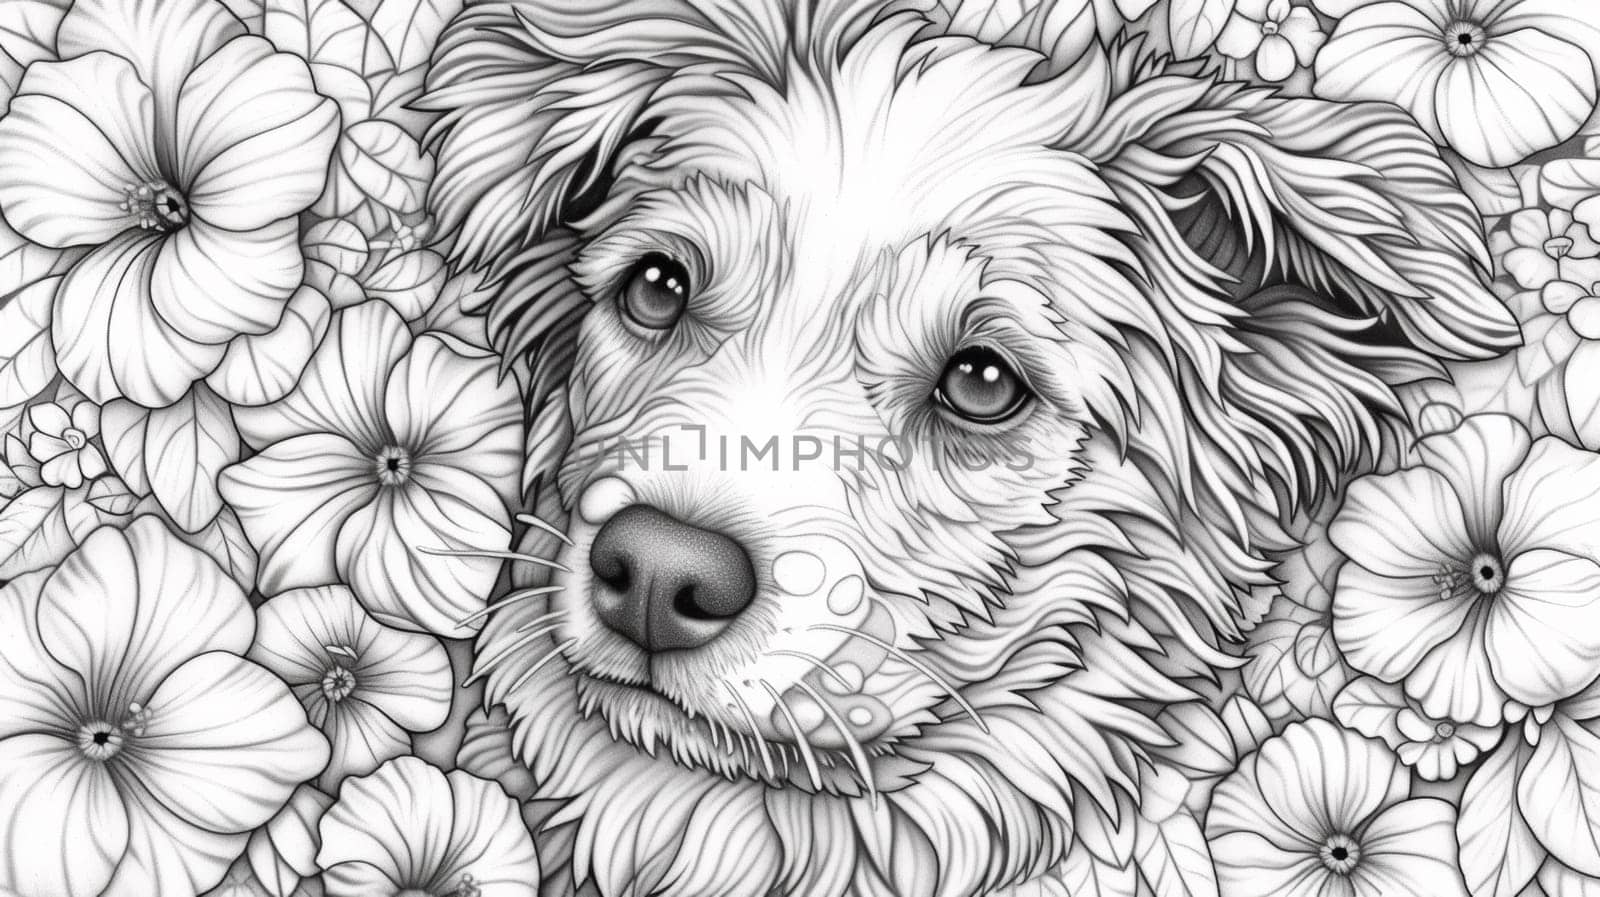 A dog is surrounded by flowers in this coloring page, AI by starush